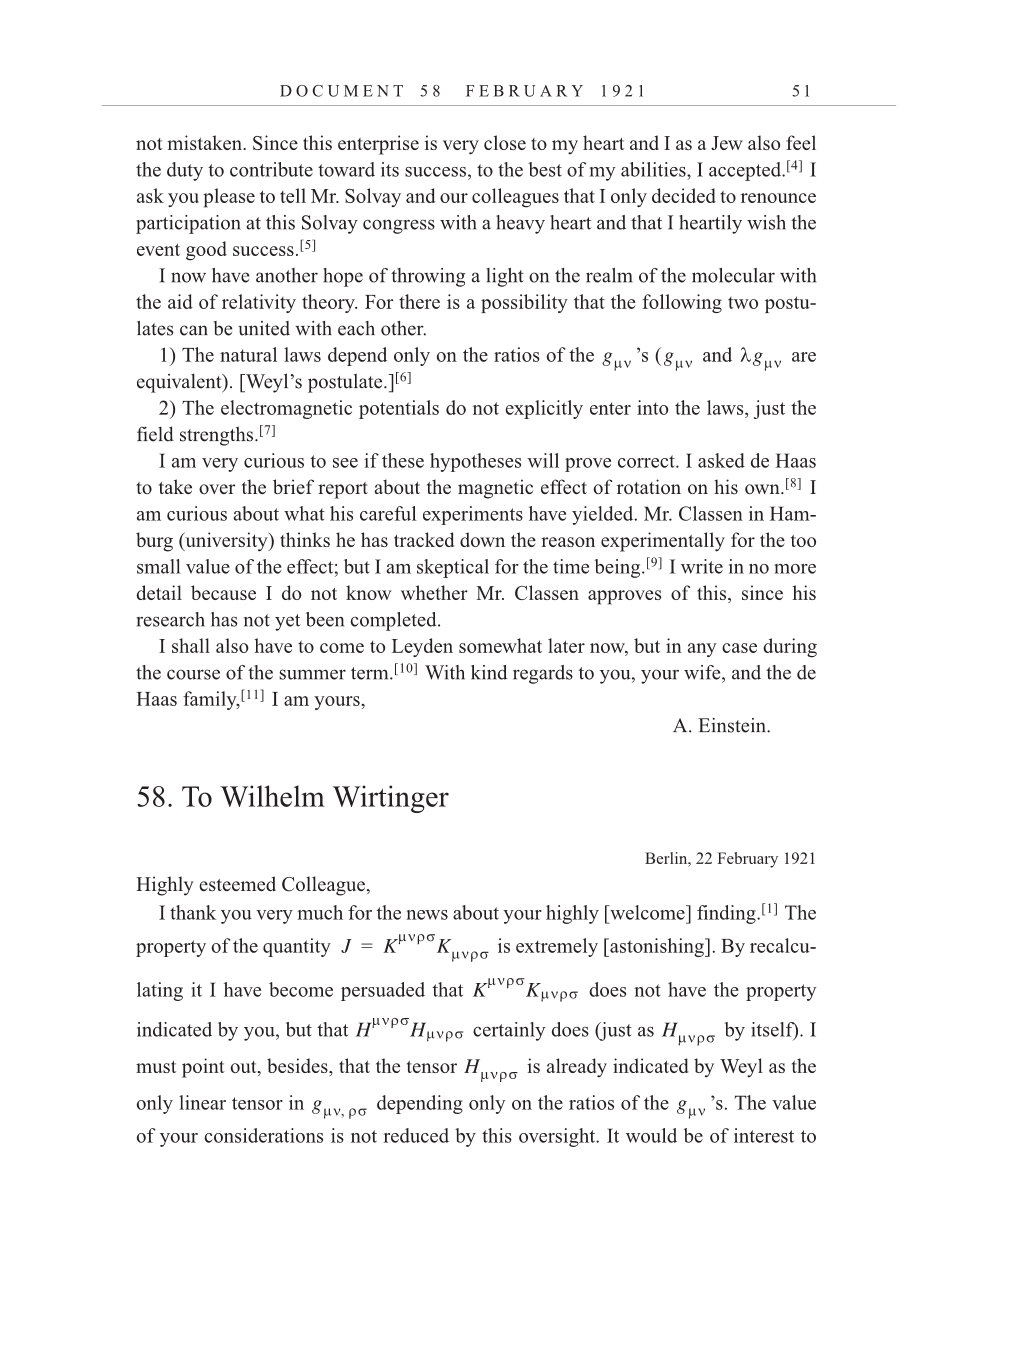 Volume 12: The Berlin Years: Correspondence, January-December 1921 (English translation supplement) page 51